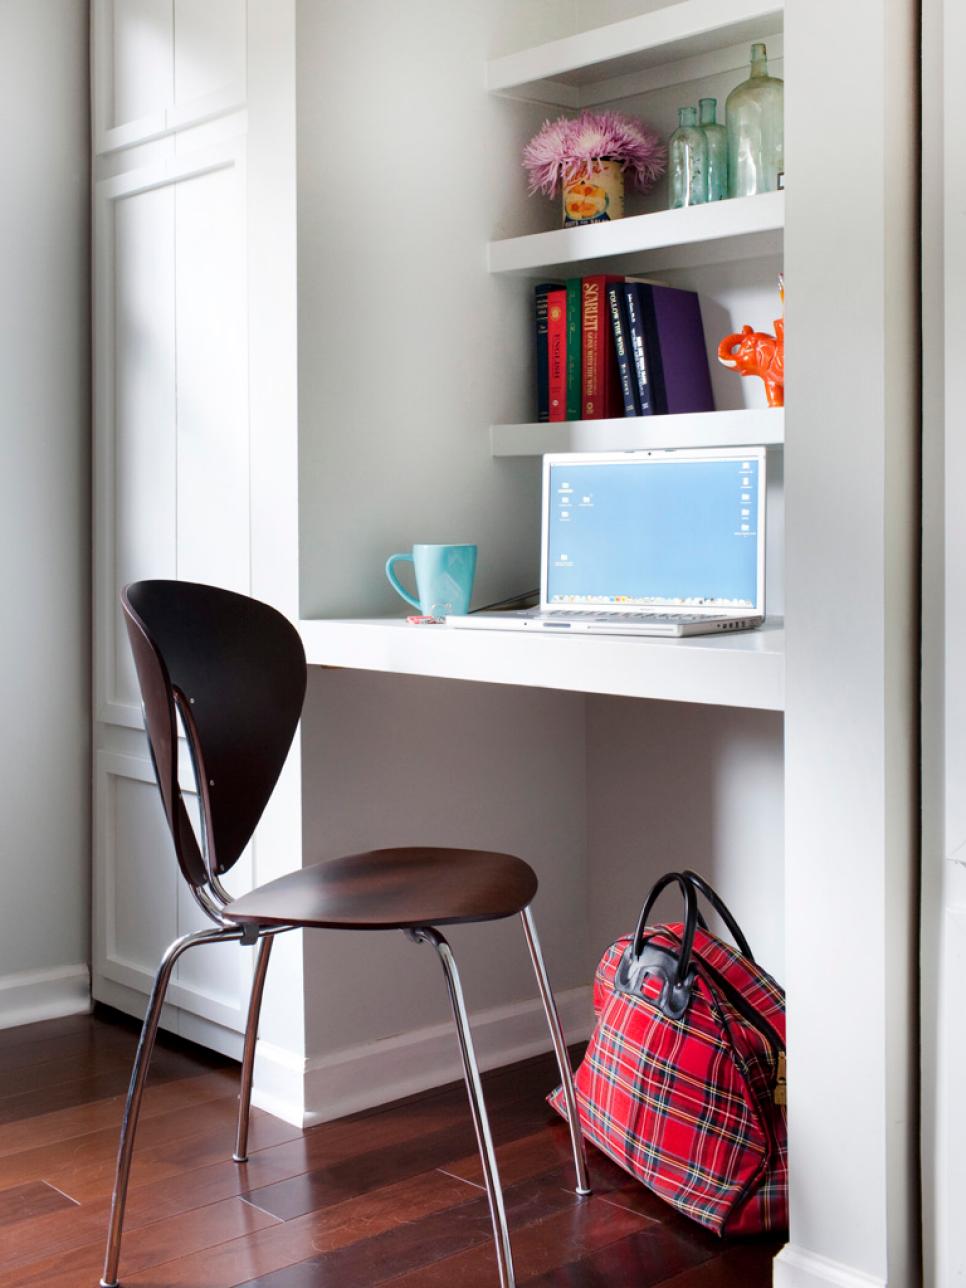 Small Home Office Ideas And Tips For Creating Yours - Page 2 of 2